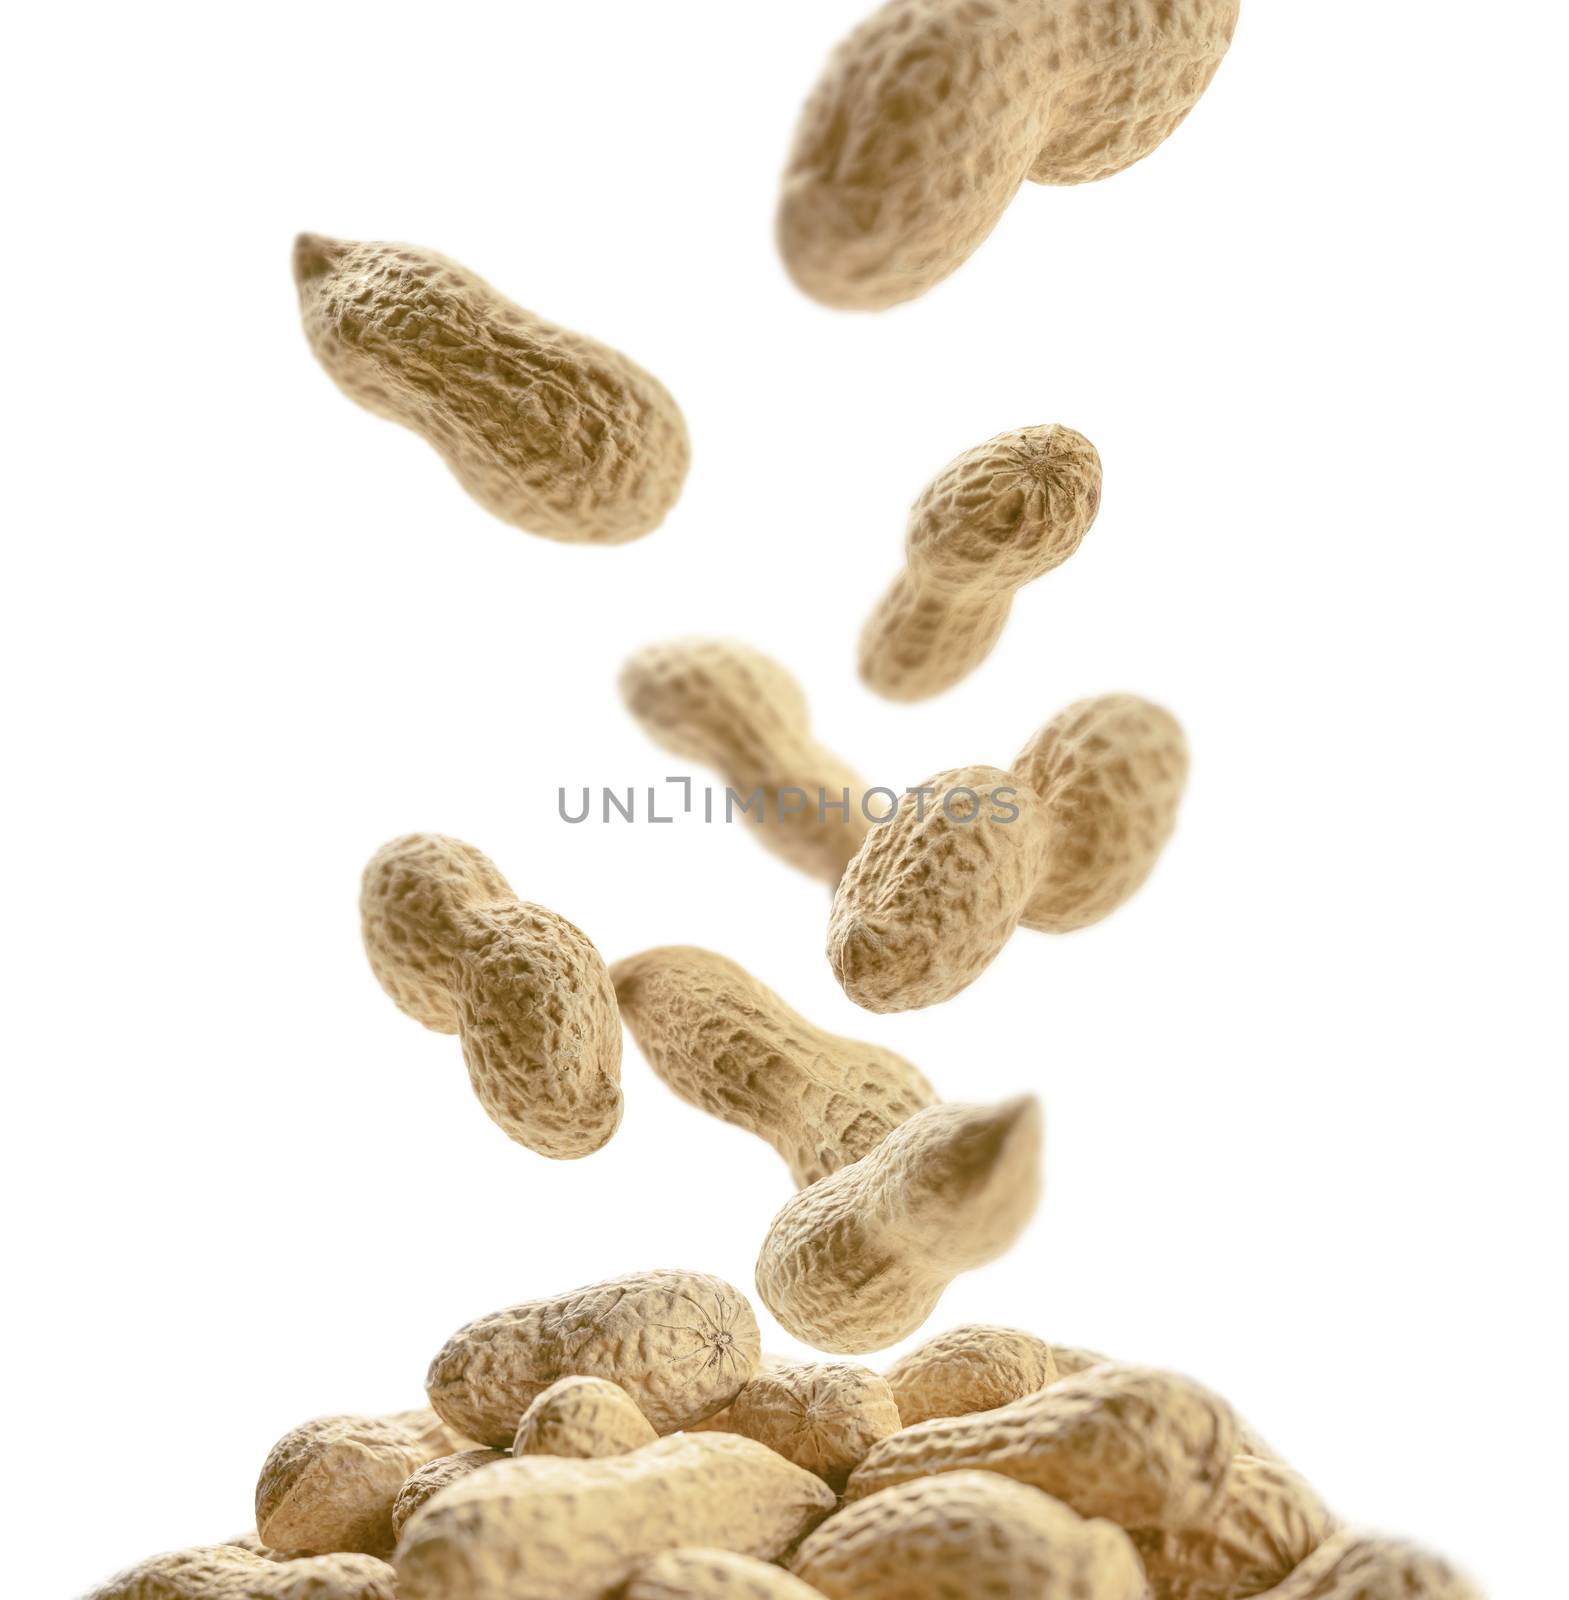 Peanuts in the shell levitate on a white background.